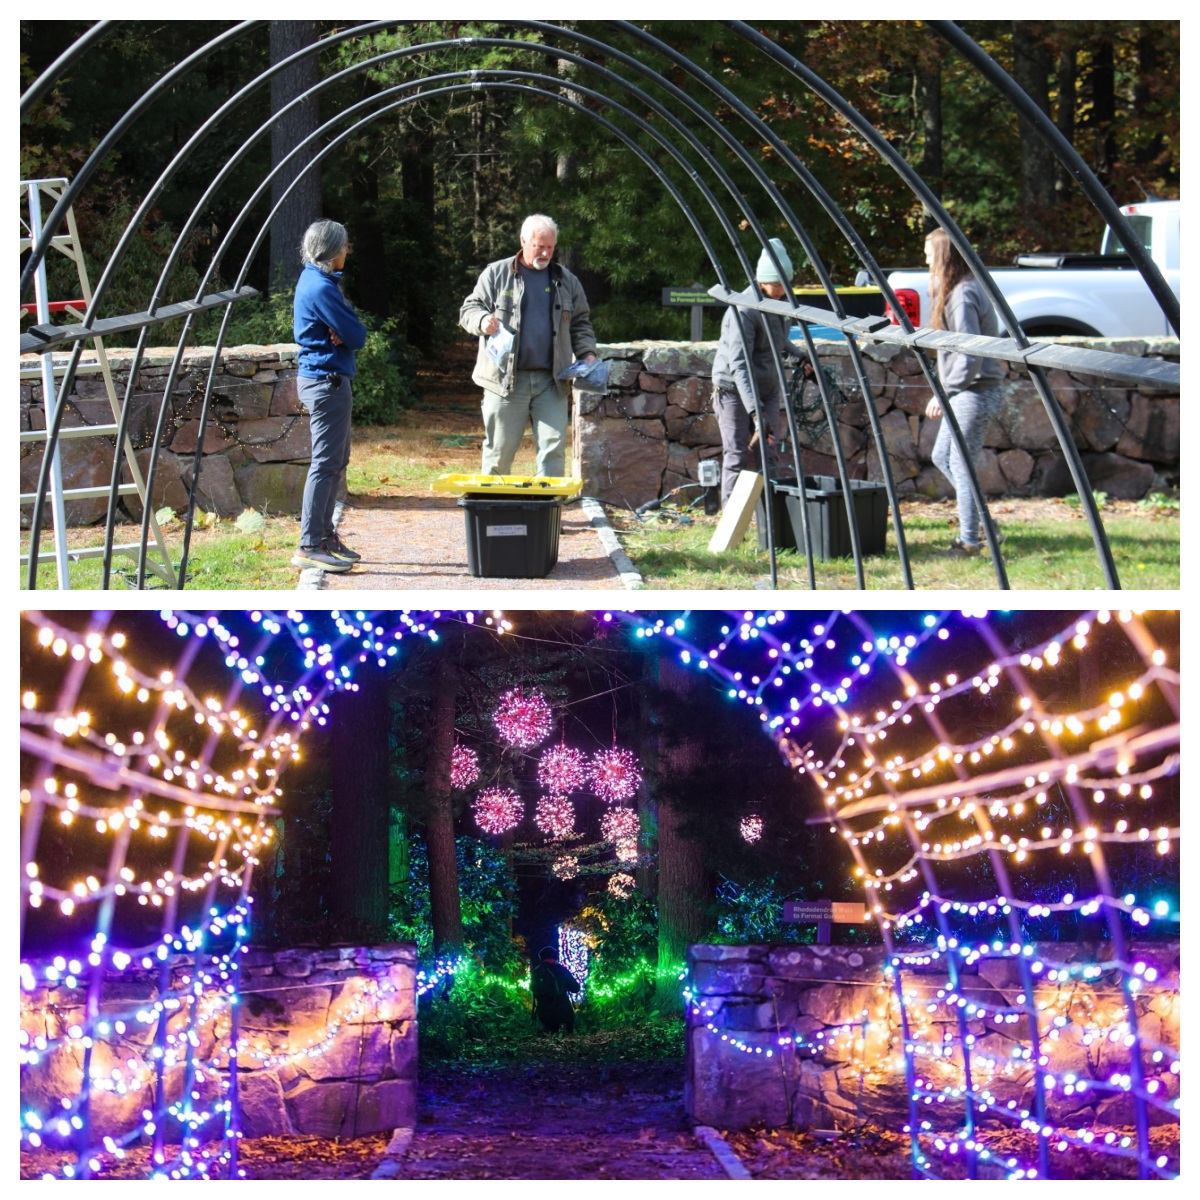 A before and after collage of Winterlights set up activities and final lighted walkways